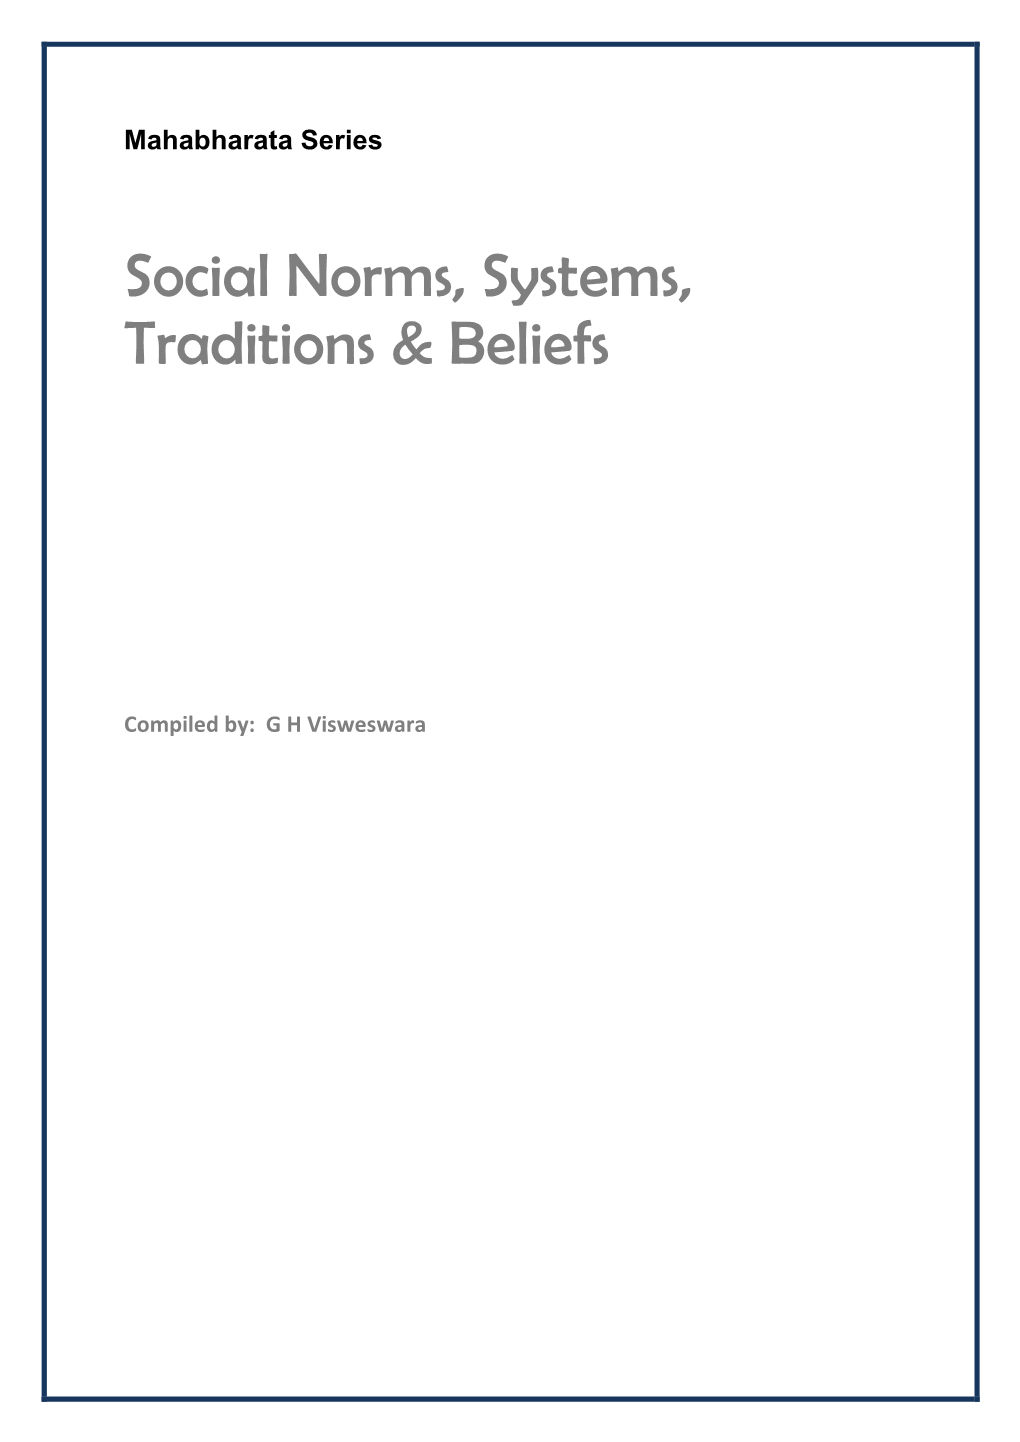 Social Norms, Systems, Traditions & Beliefs